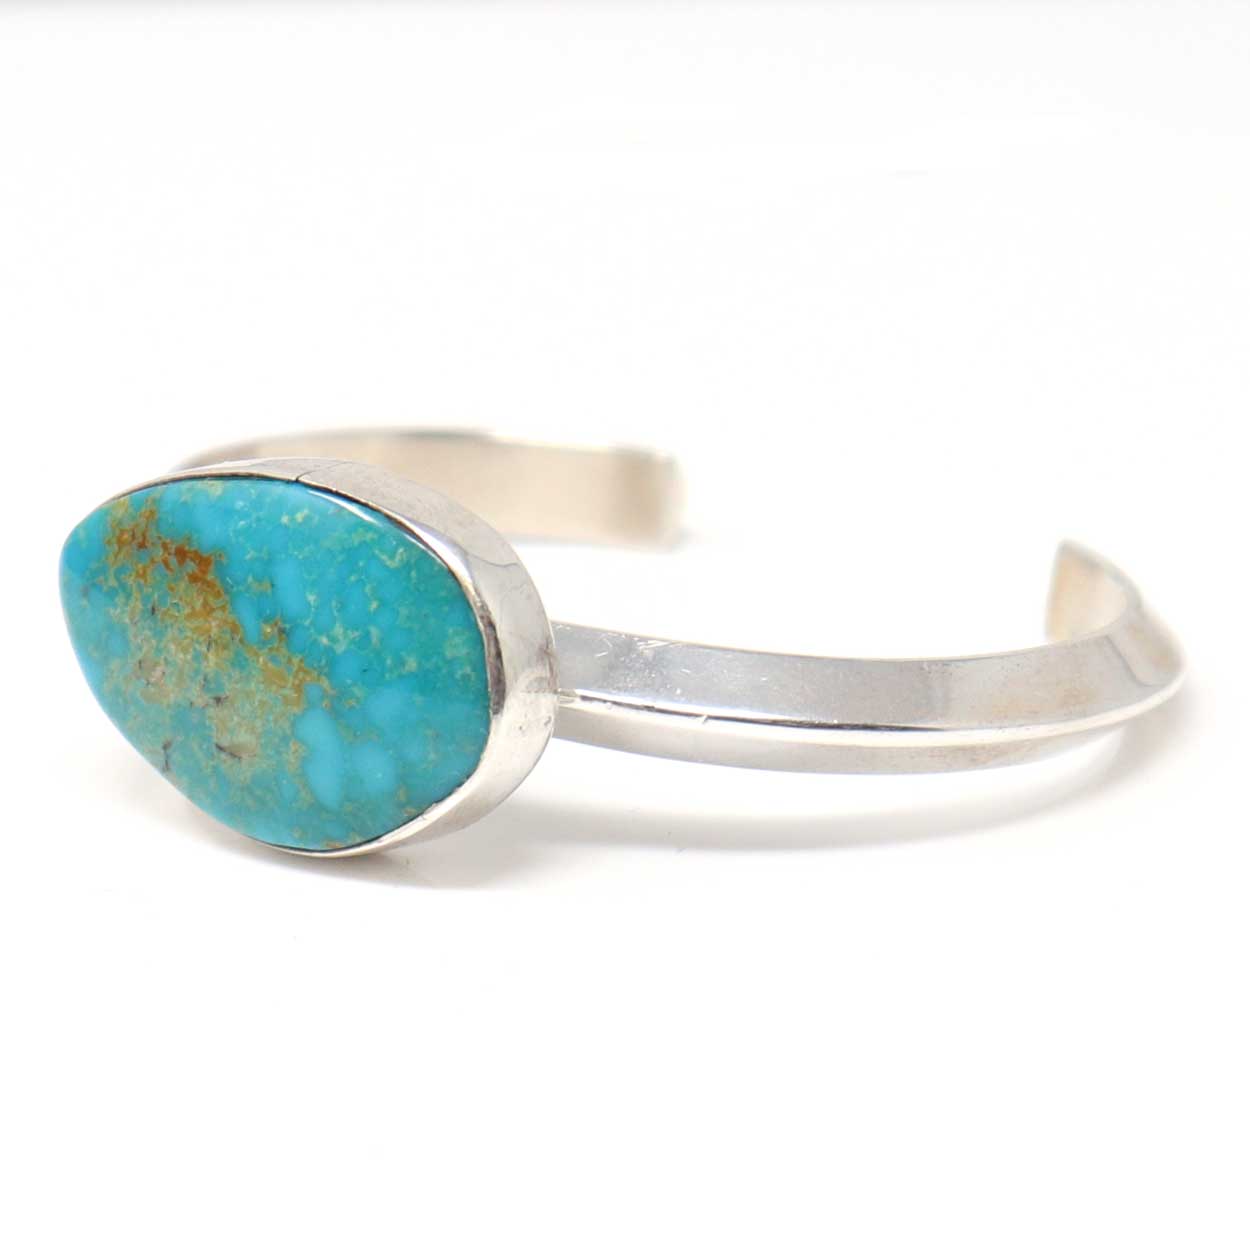 Load image into Gallery viewer, Blue Gem Turquoise Bracelet by Orville Wright
